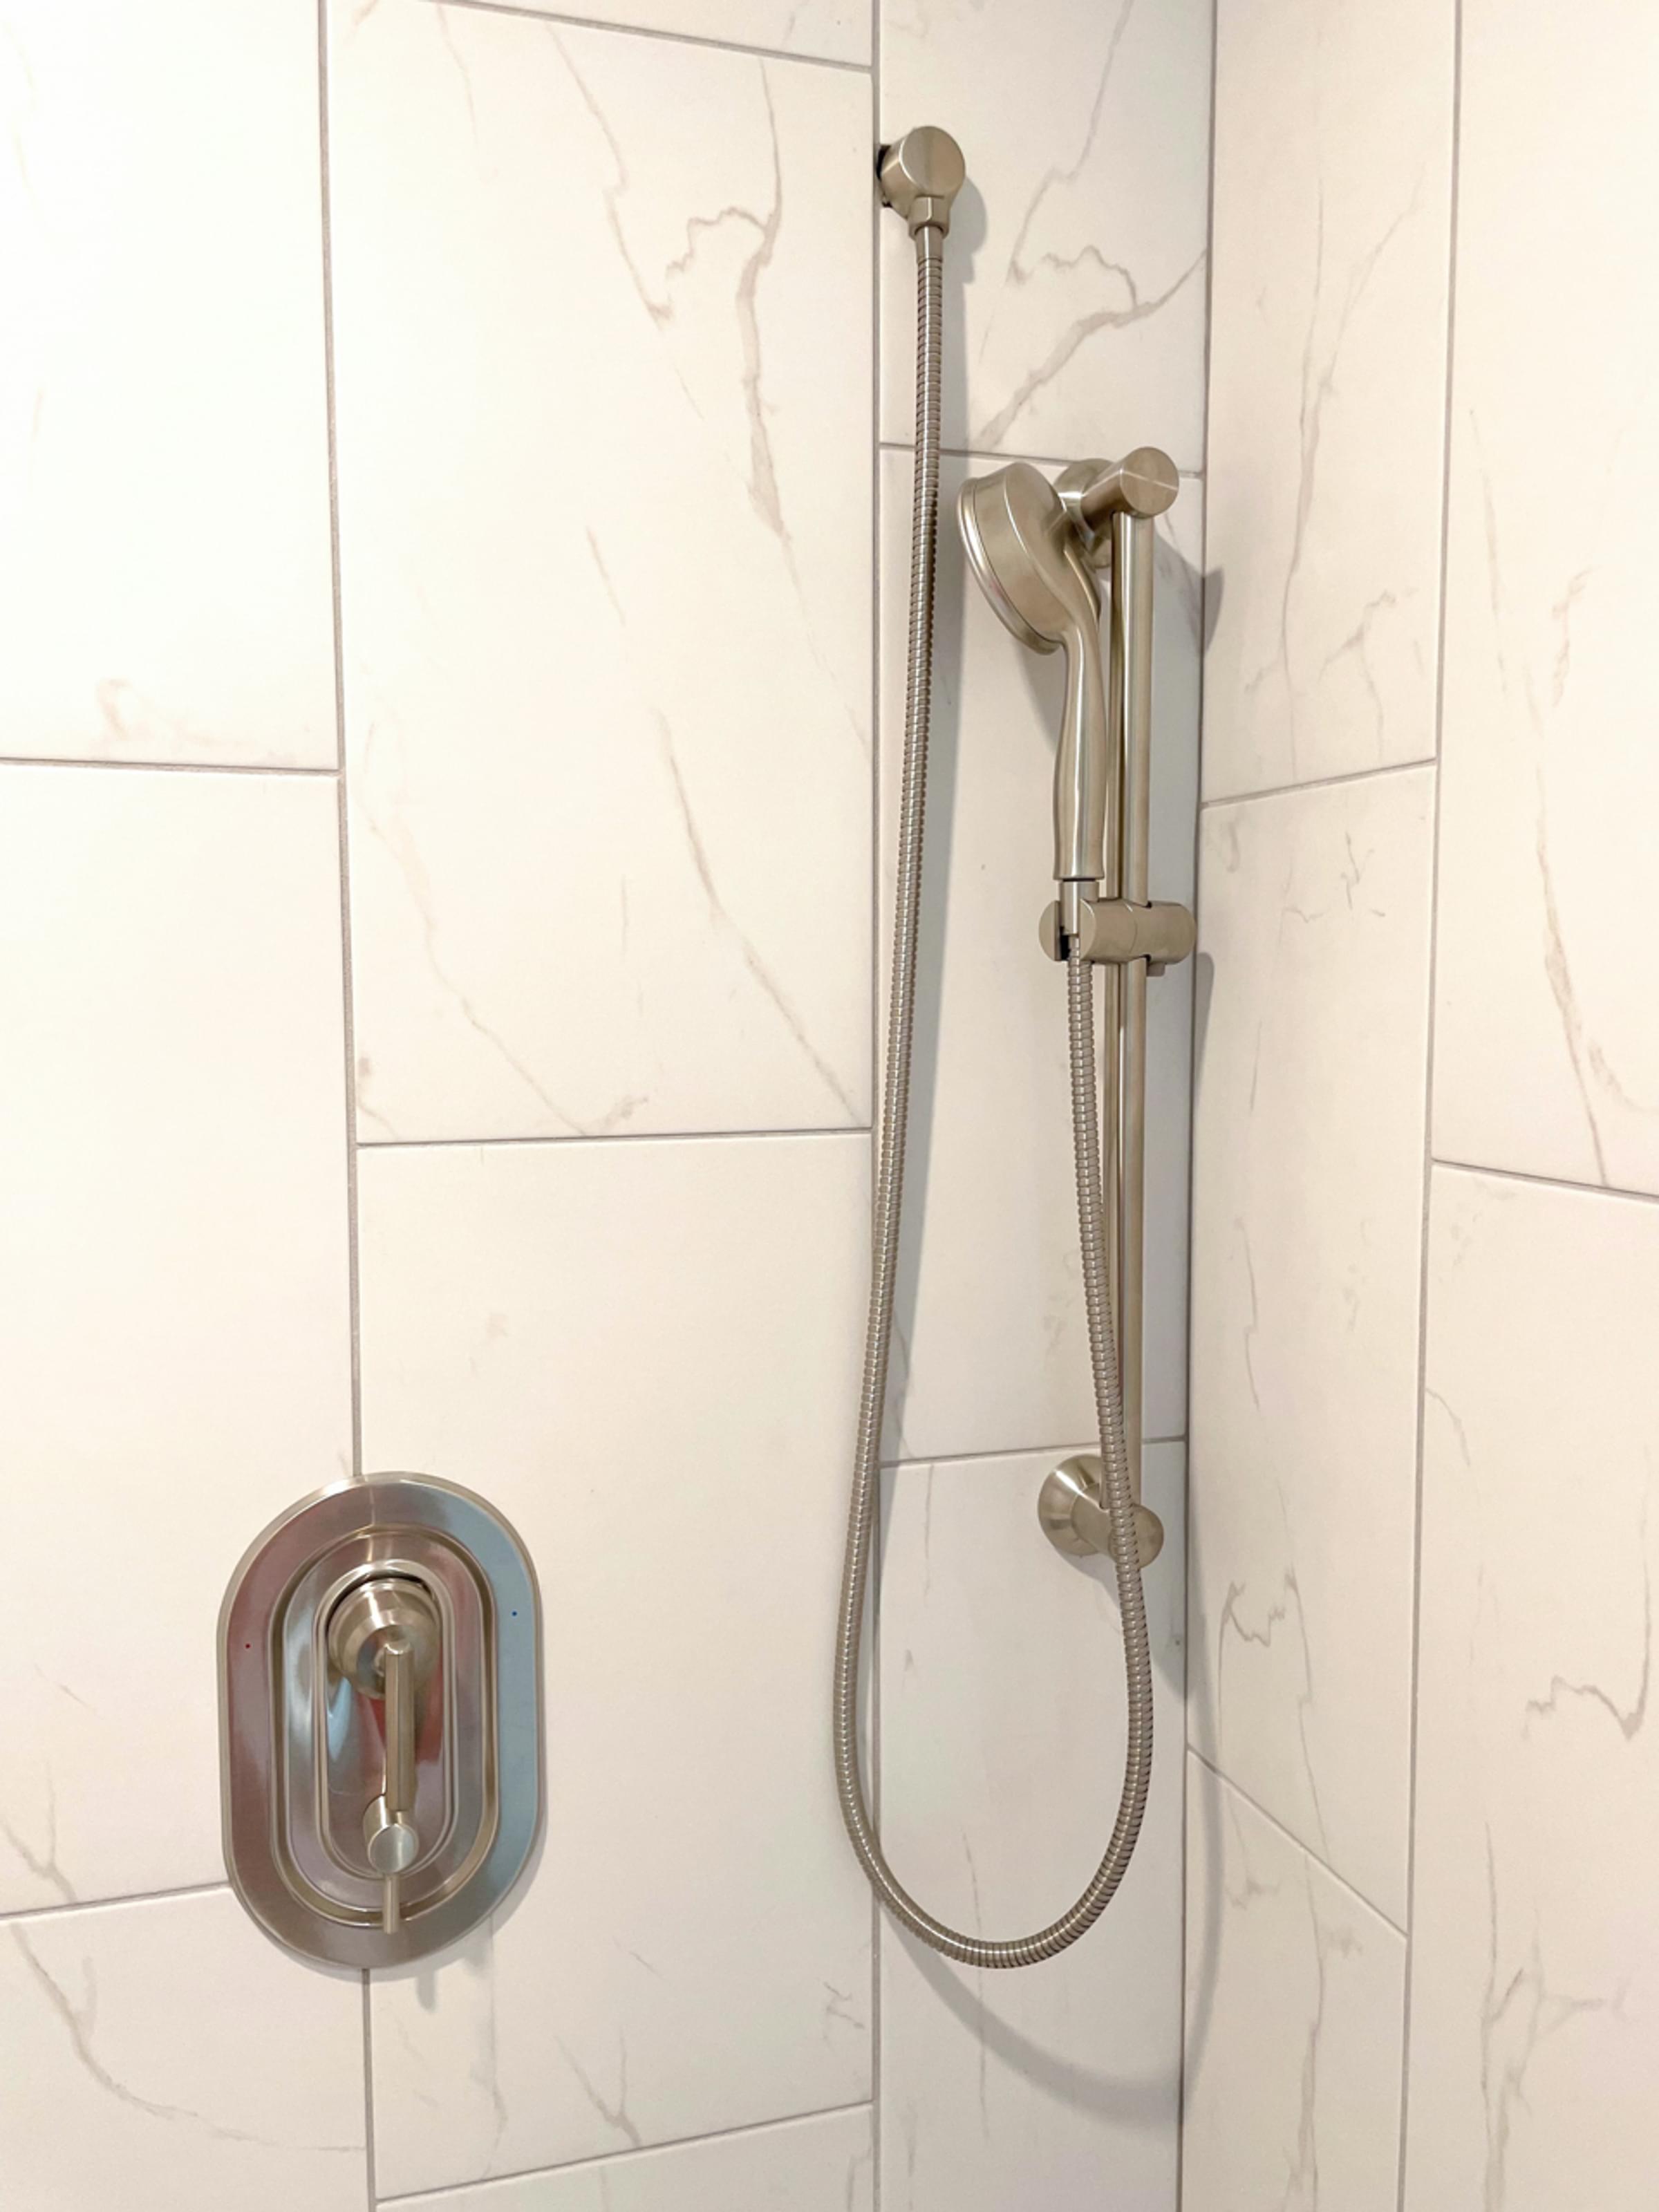 Shower with detachable shower head